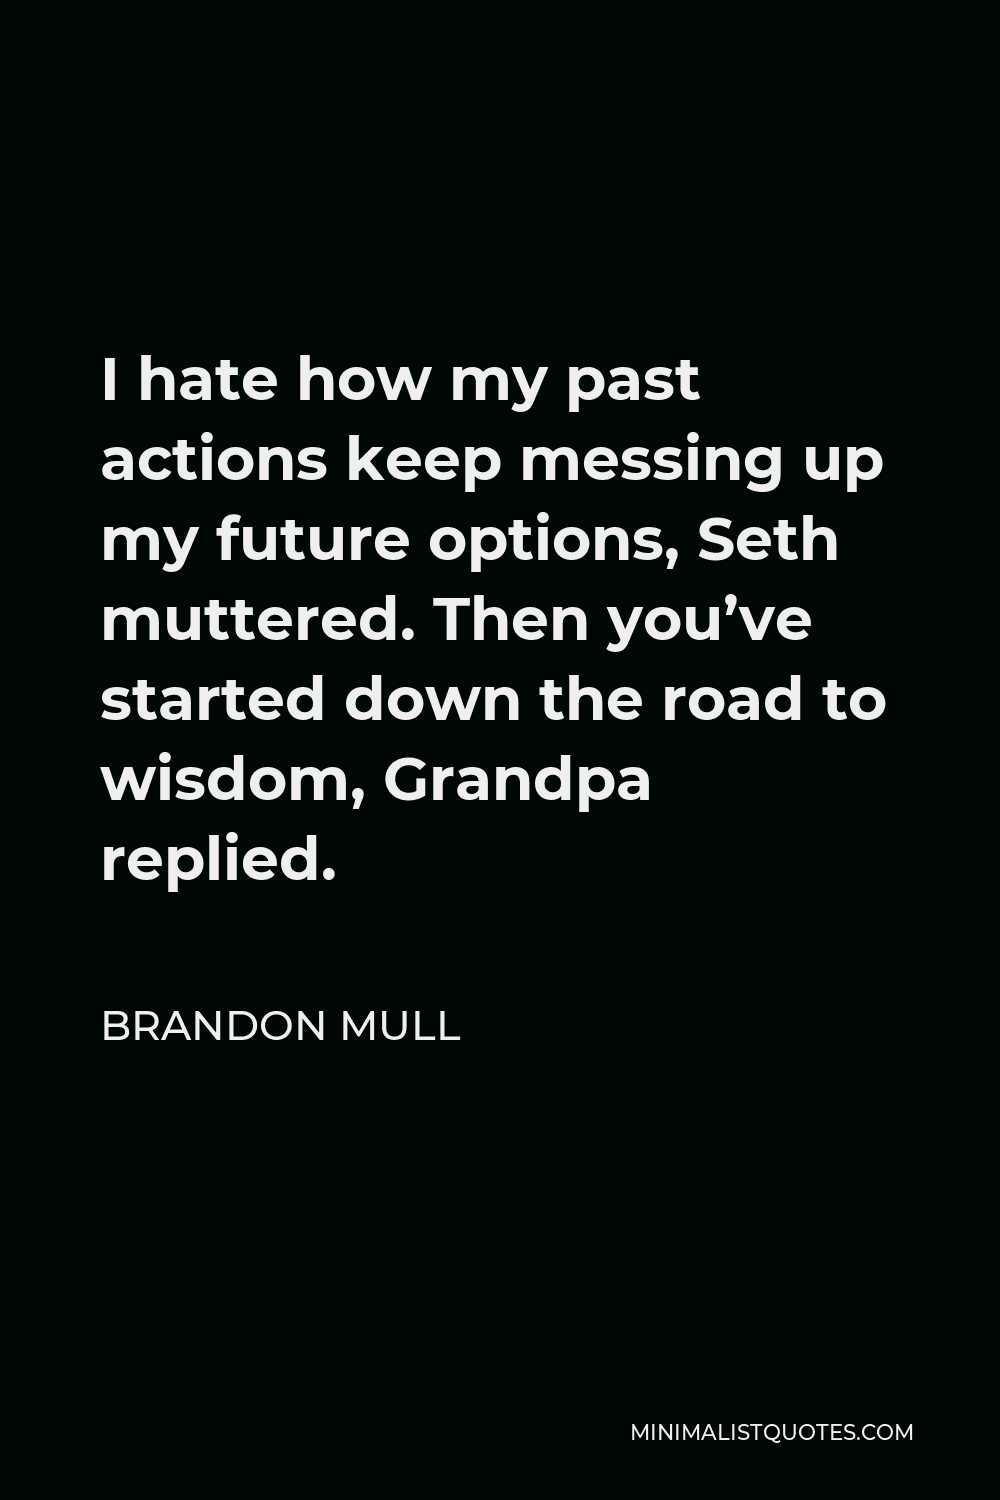 Brandon Mull Quote - I hate how my past actions keep messing up my future options, Seth muttered. Then you’ve started down the road to wisdom, Grandpa replied.